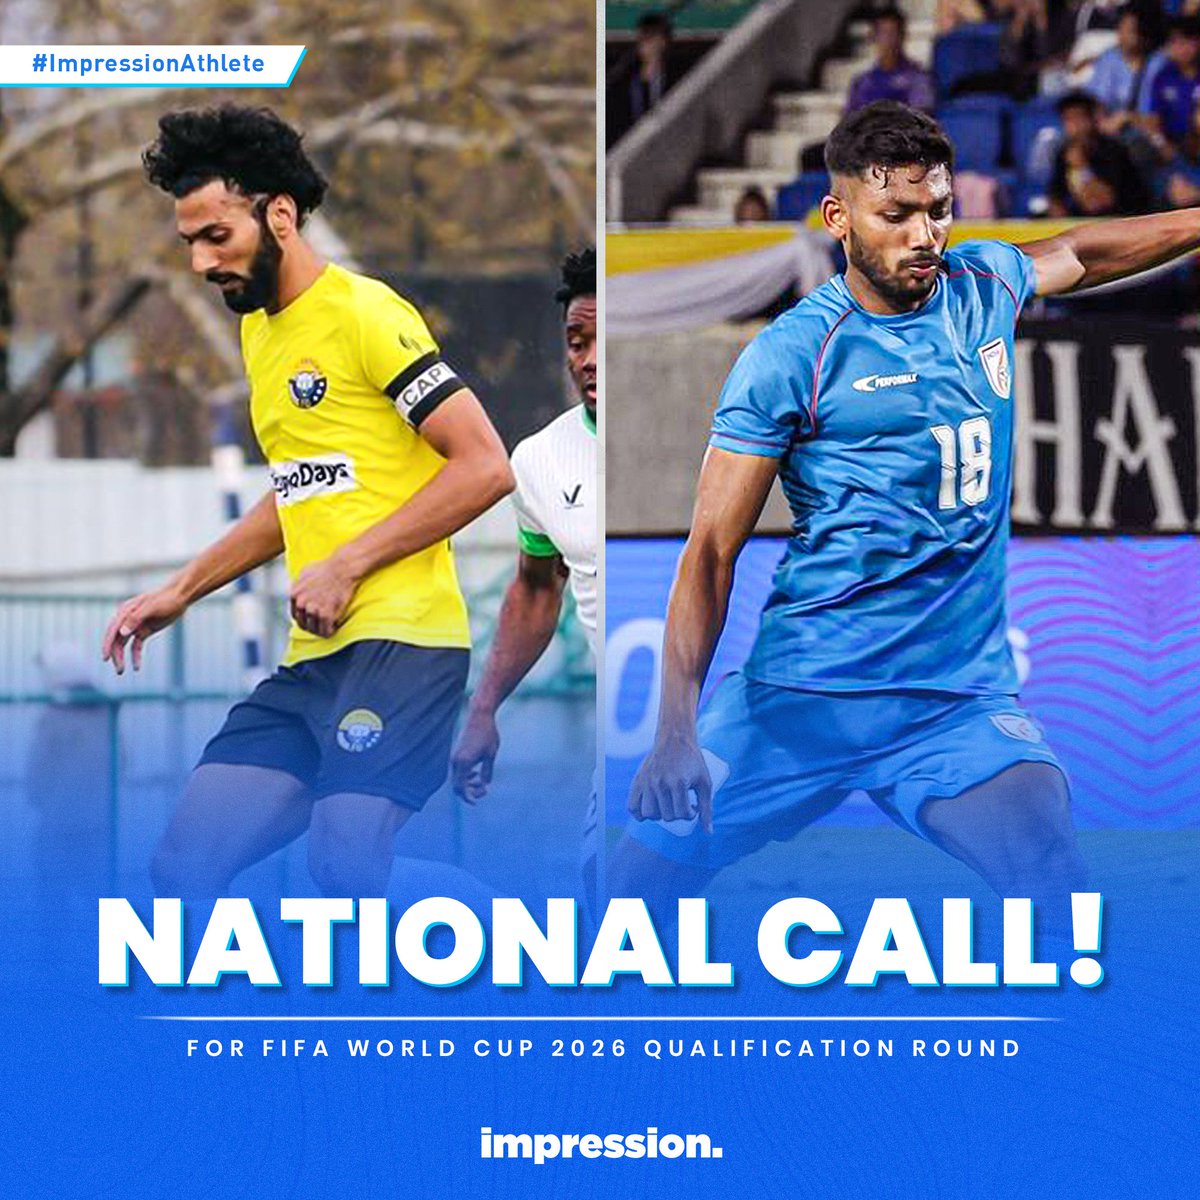 Our athletes 𝐌𝐮𝐡𝐚𝐦𝐦𝐚𝐝 𝐇𝐚𝐦𝐦𝐚𝐝 and 𝐑𝐚𝐡𝐢𝐦 𝐀𝐥𝐢 has been named in the 26-member Indian National Team probable list for the upcoming FIFA WC qualifiers! 🇮🇳

Onwards and upwards 🔝

#TeamImpression #ImpressionAthlete #IndianFootball